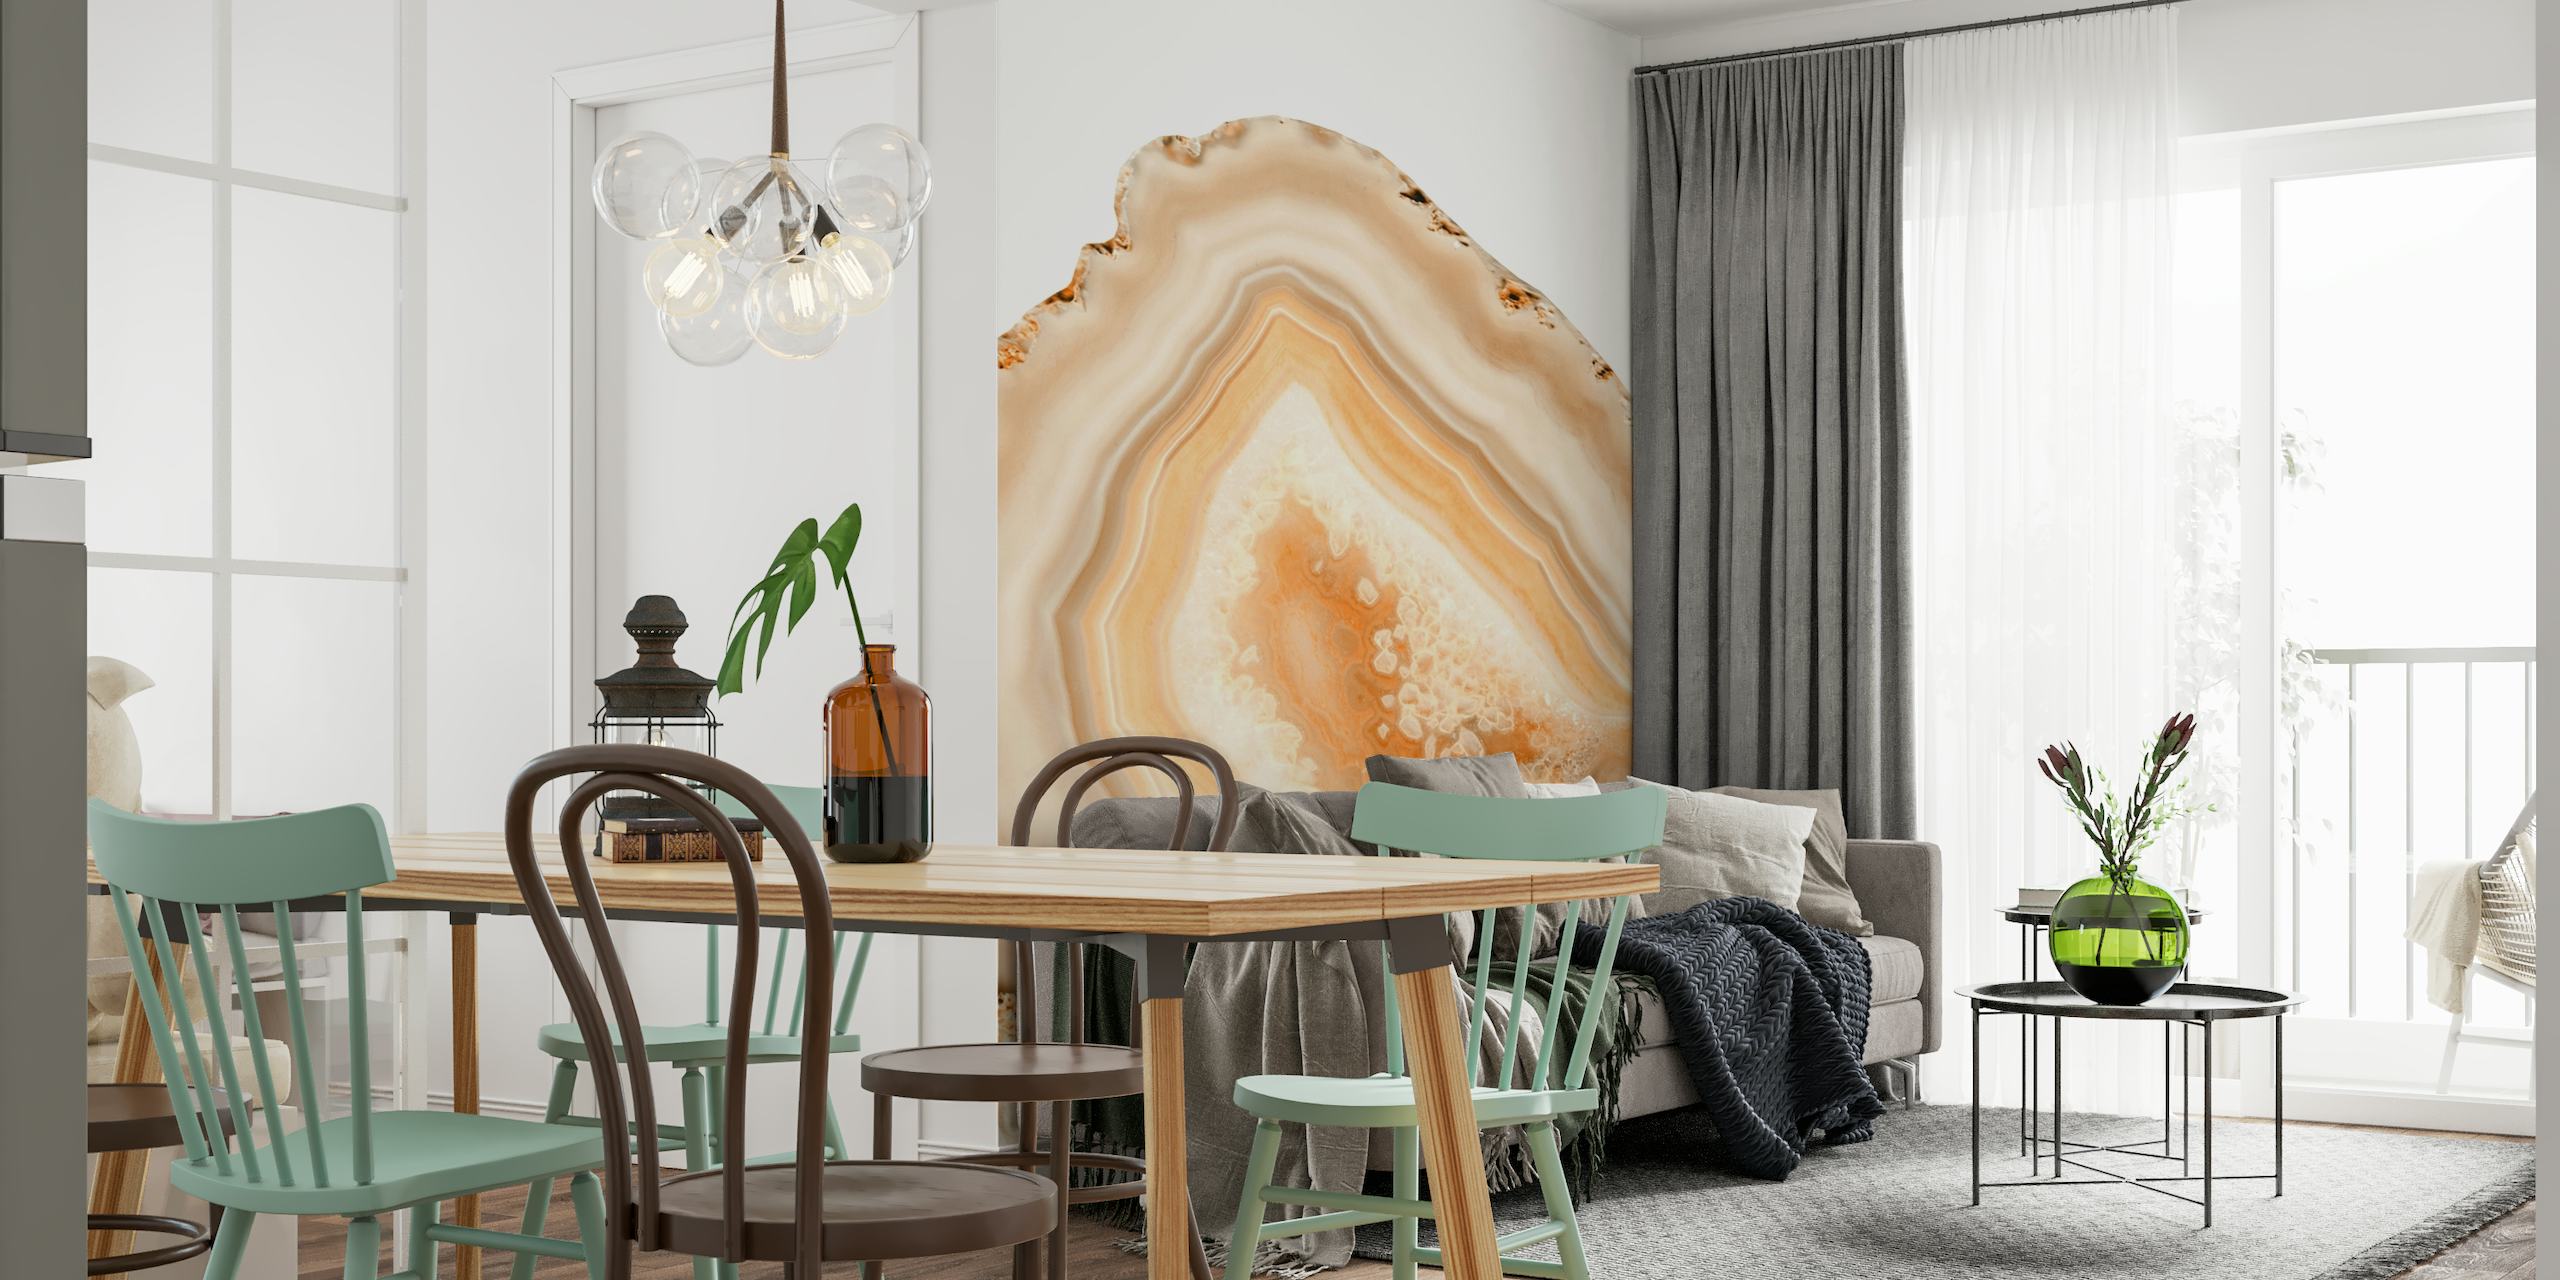 Soft Orange Agate pattern wall mural showcasing warm hues and natural crystalline designs